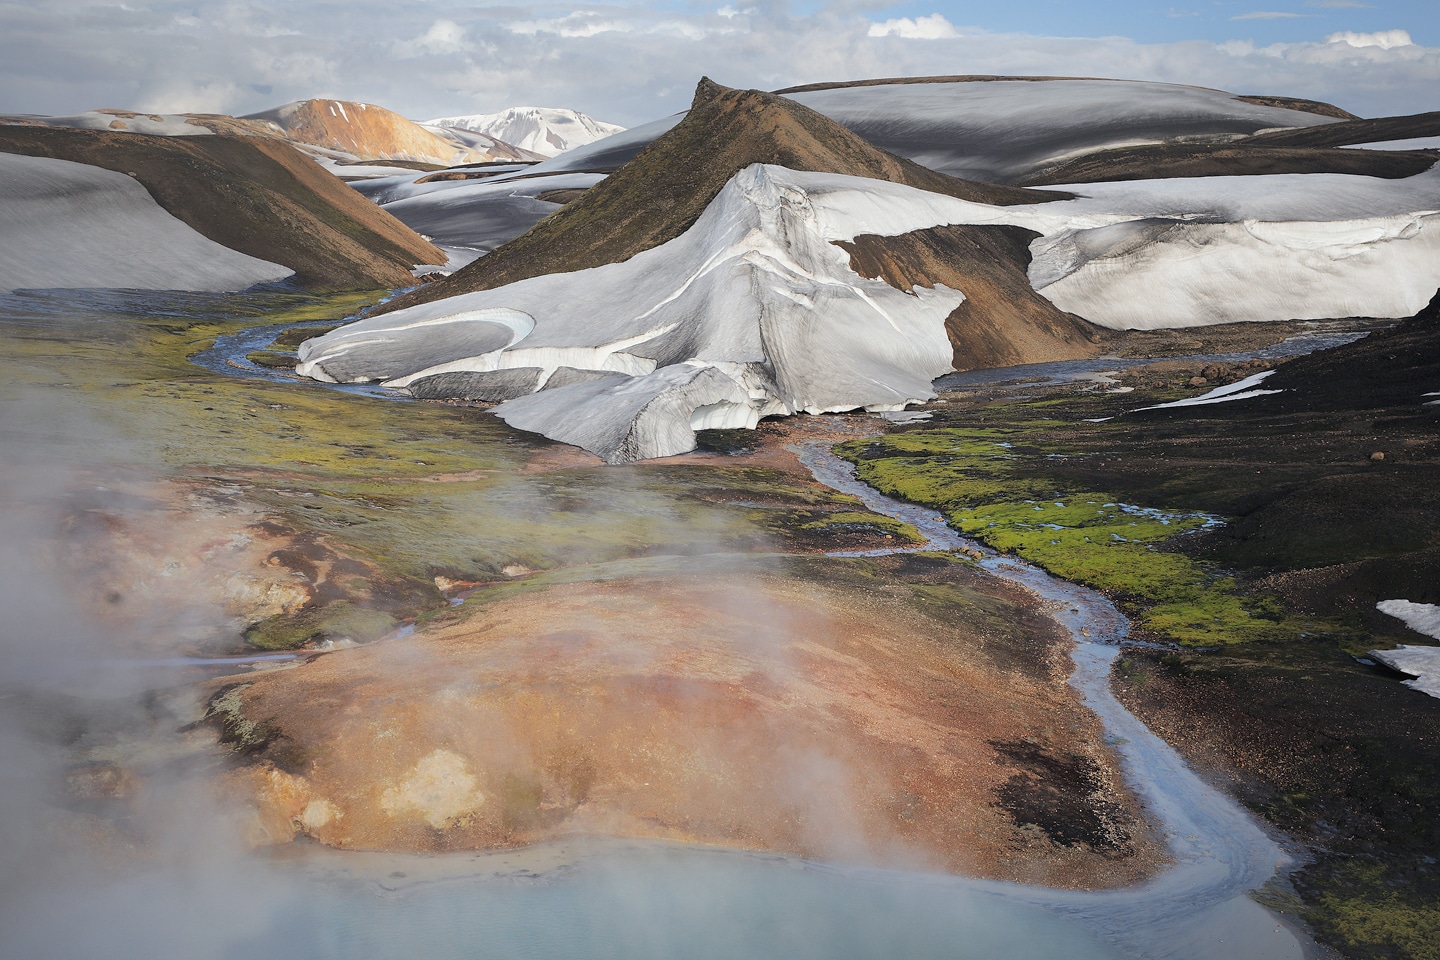 Adventure in Iceland, early September 2022 - Photography Workshops by Erin Babnik